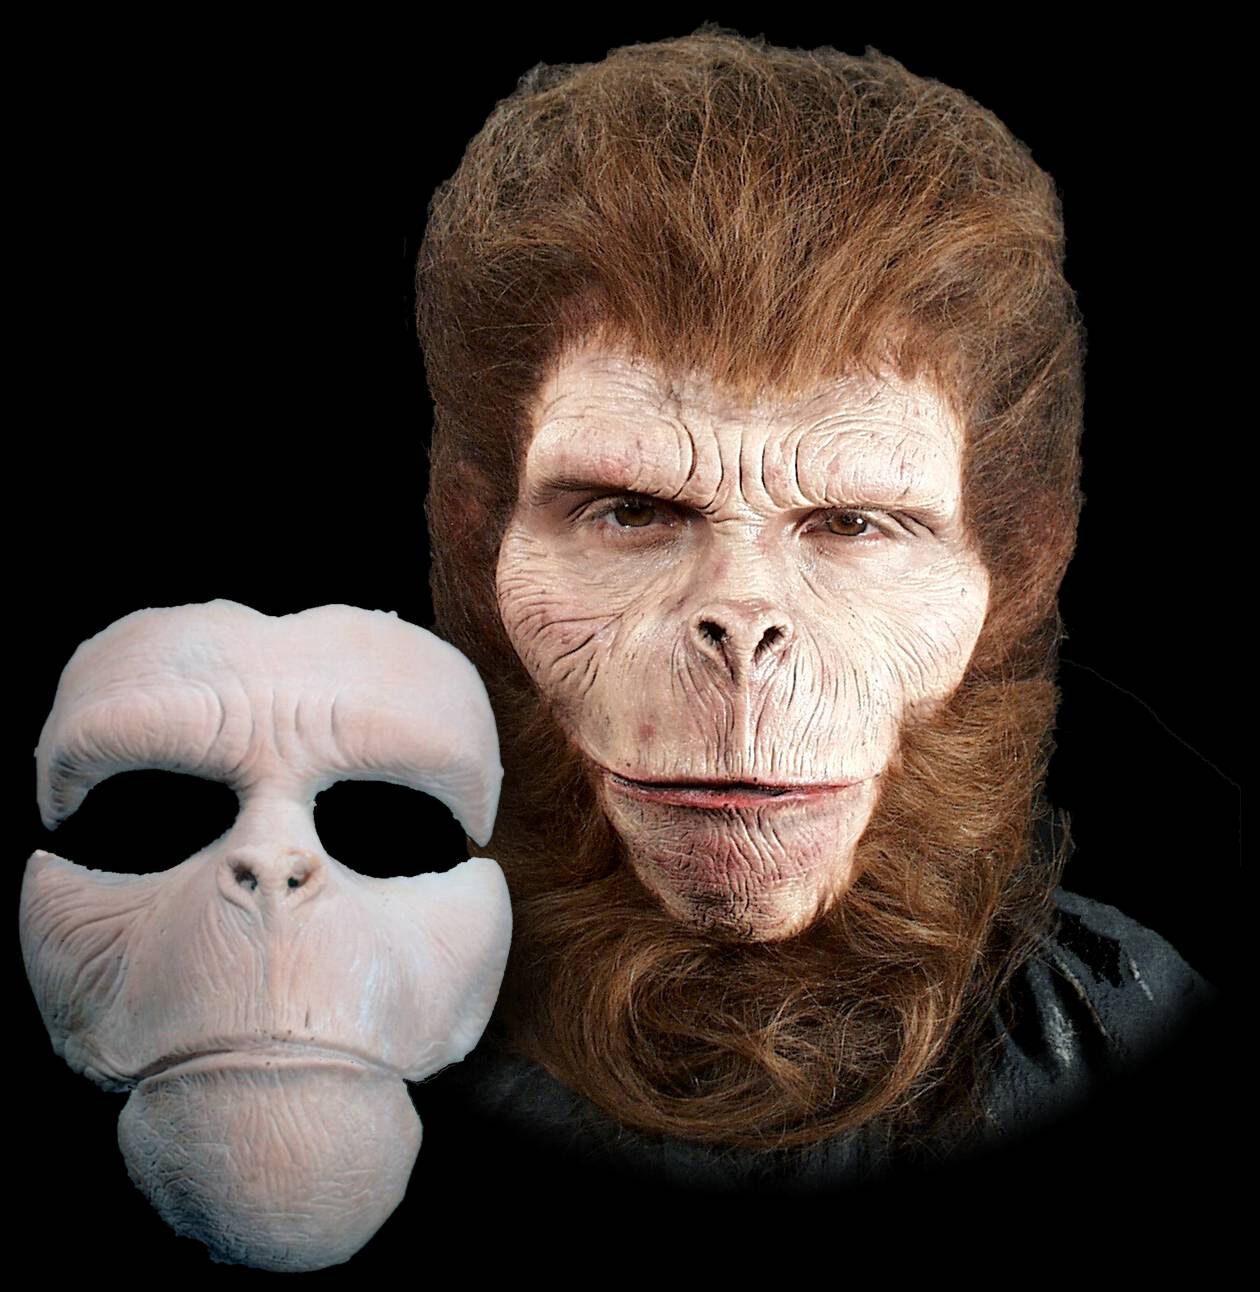 Chimpanzee Ape Halloween Mask Foam Latex Prosthetic Appliance Moves with Face